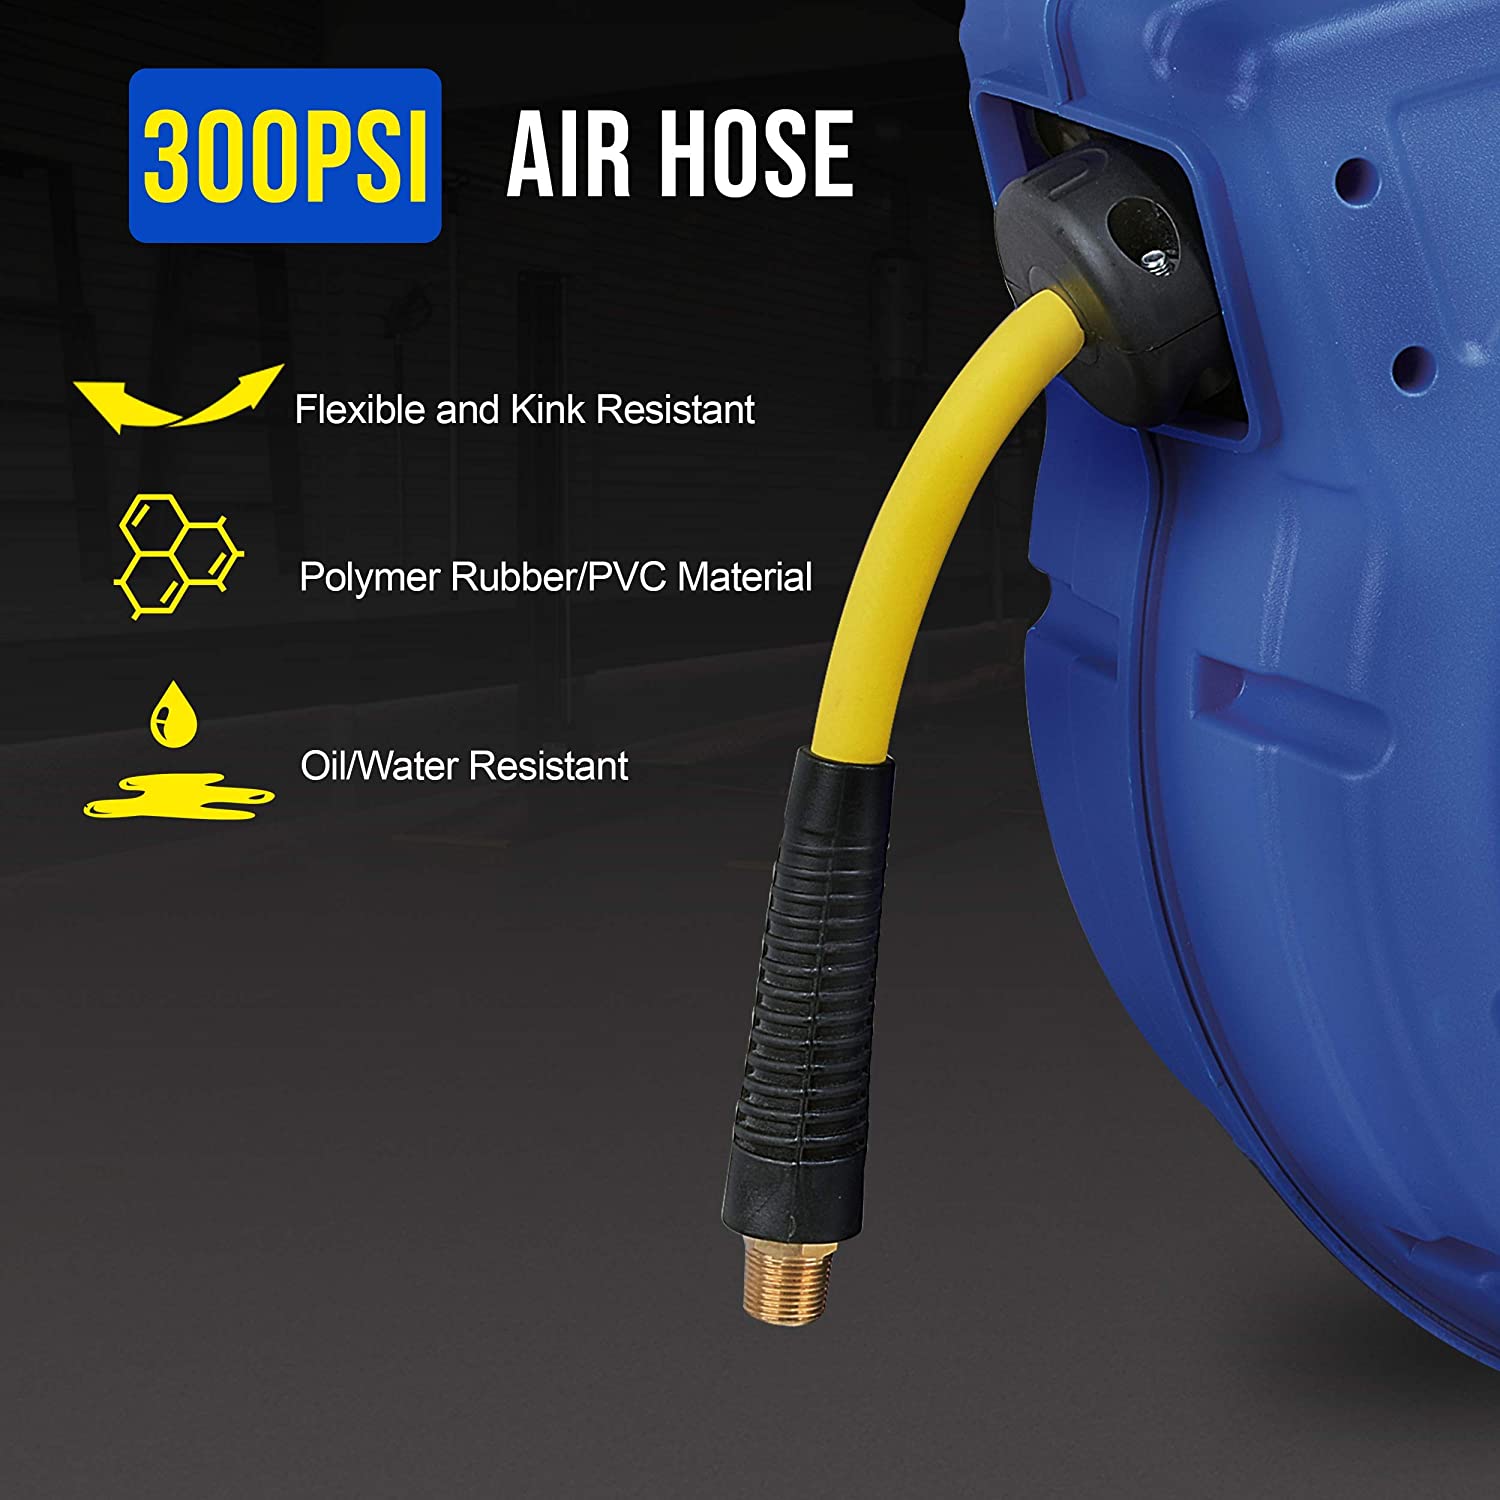 GOODYEAR Spring Driven Steel Retractable Hose Reel (3/8 in. x 100 ft.) 